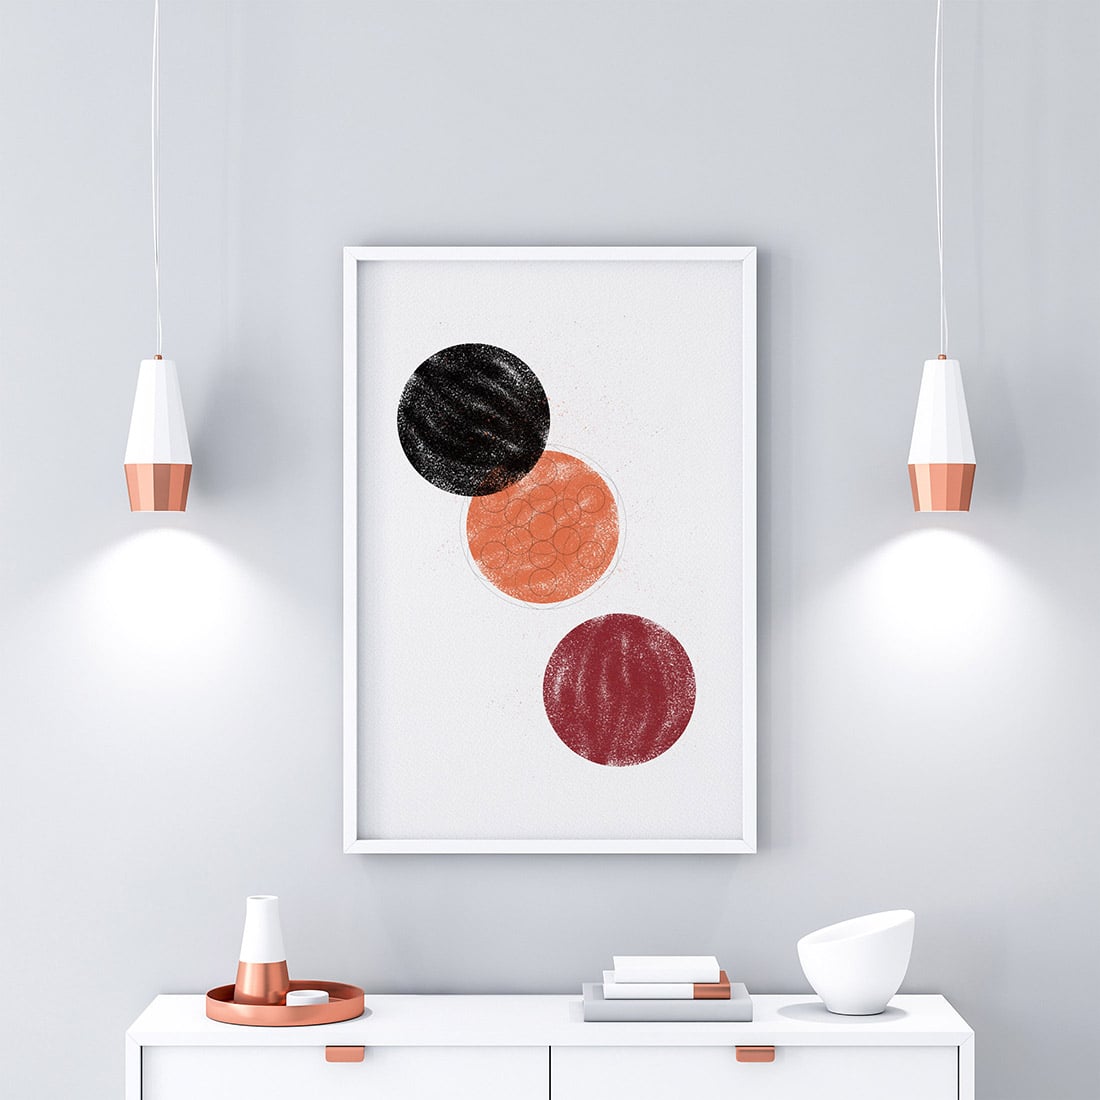 Harvest Moon: A Fall Gift Guide • Little Gold Pixel • In which I round up 20 cozy items in a fall gift guide that invokes that Harvest Moon vibe. Decor in seasonal shades of dark red, orange and black.